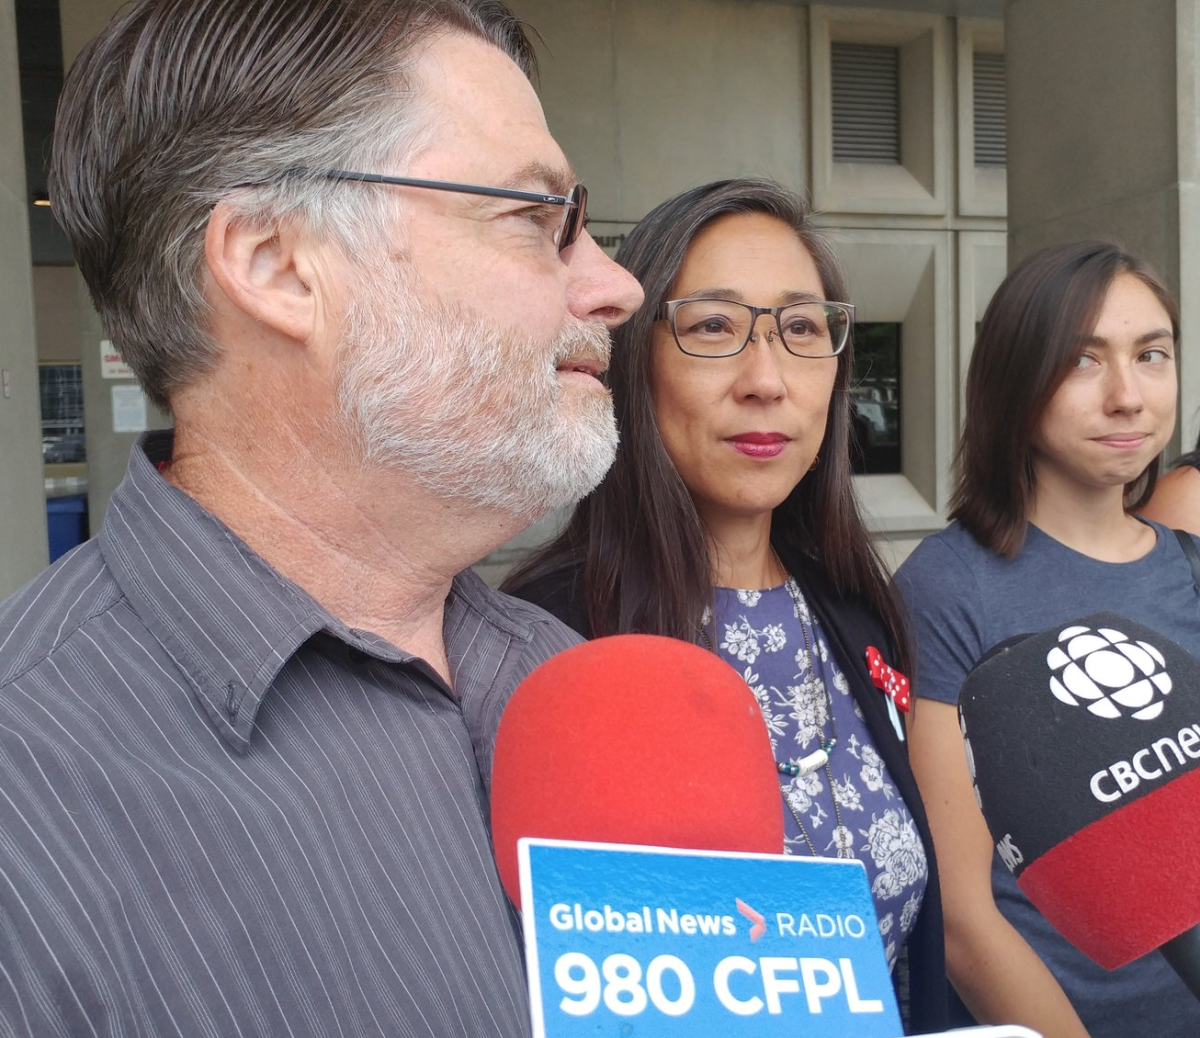 Nathan's father Tim Deslippe, his mother Mona Lam-Deslippe, and sister Jessica Deslippe spoke with reporters outside the courthouse on July 12, 2018.